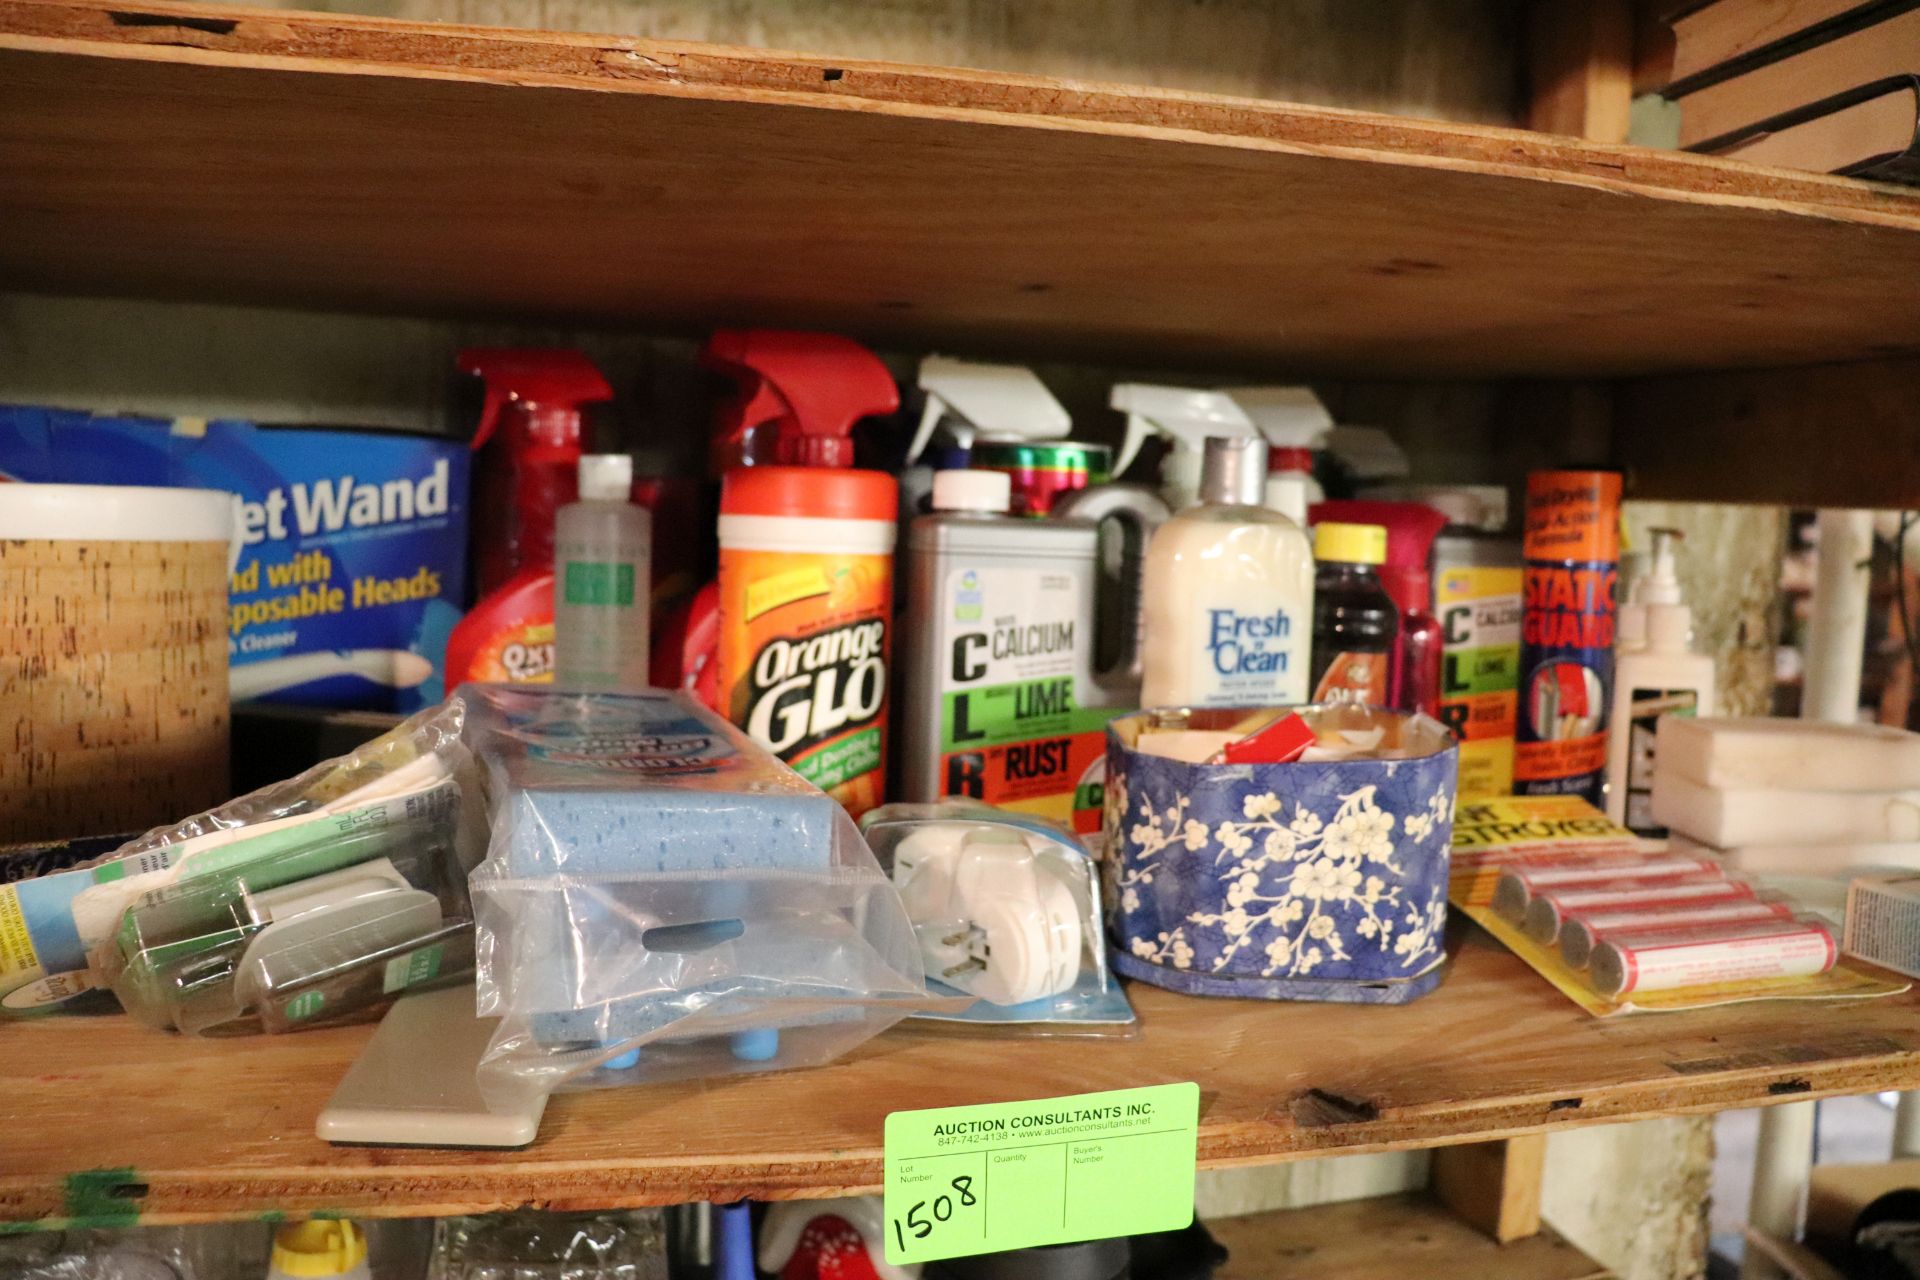 Miscellaneous cleaning supplies